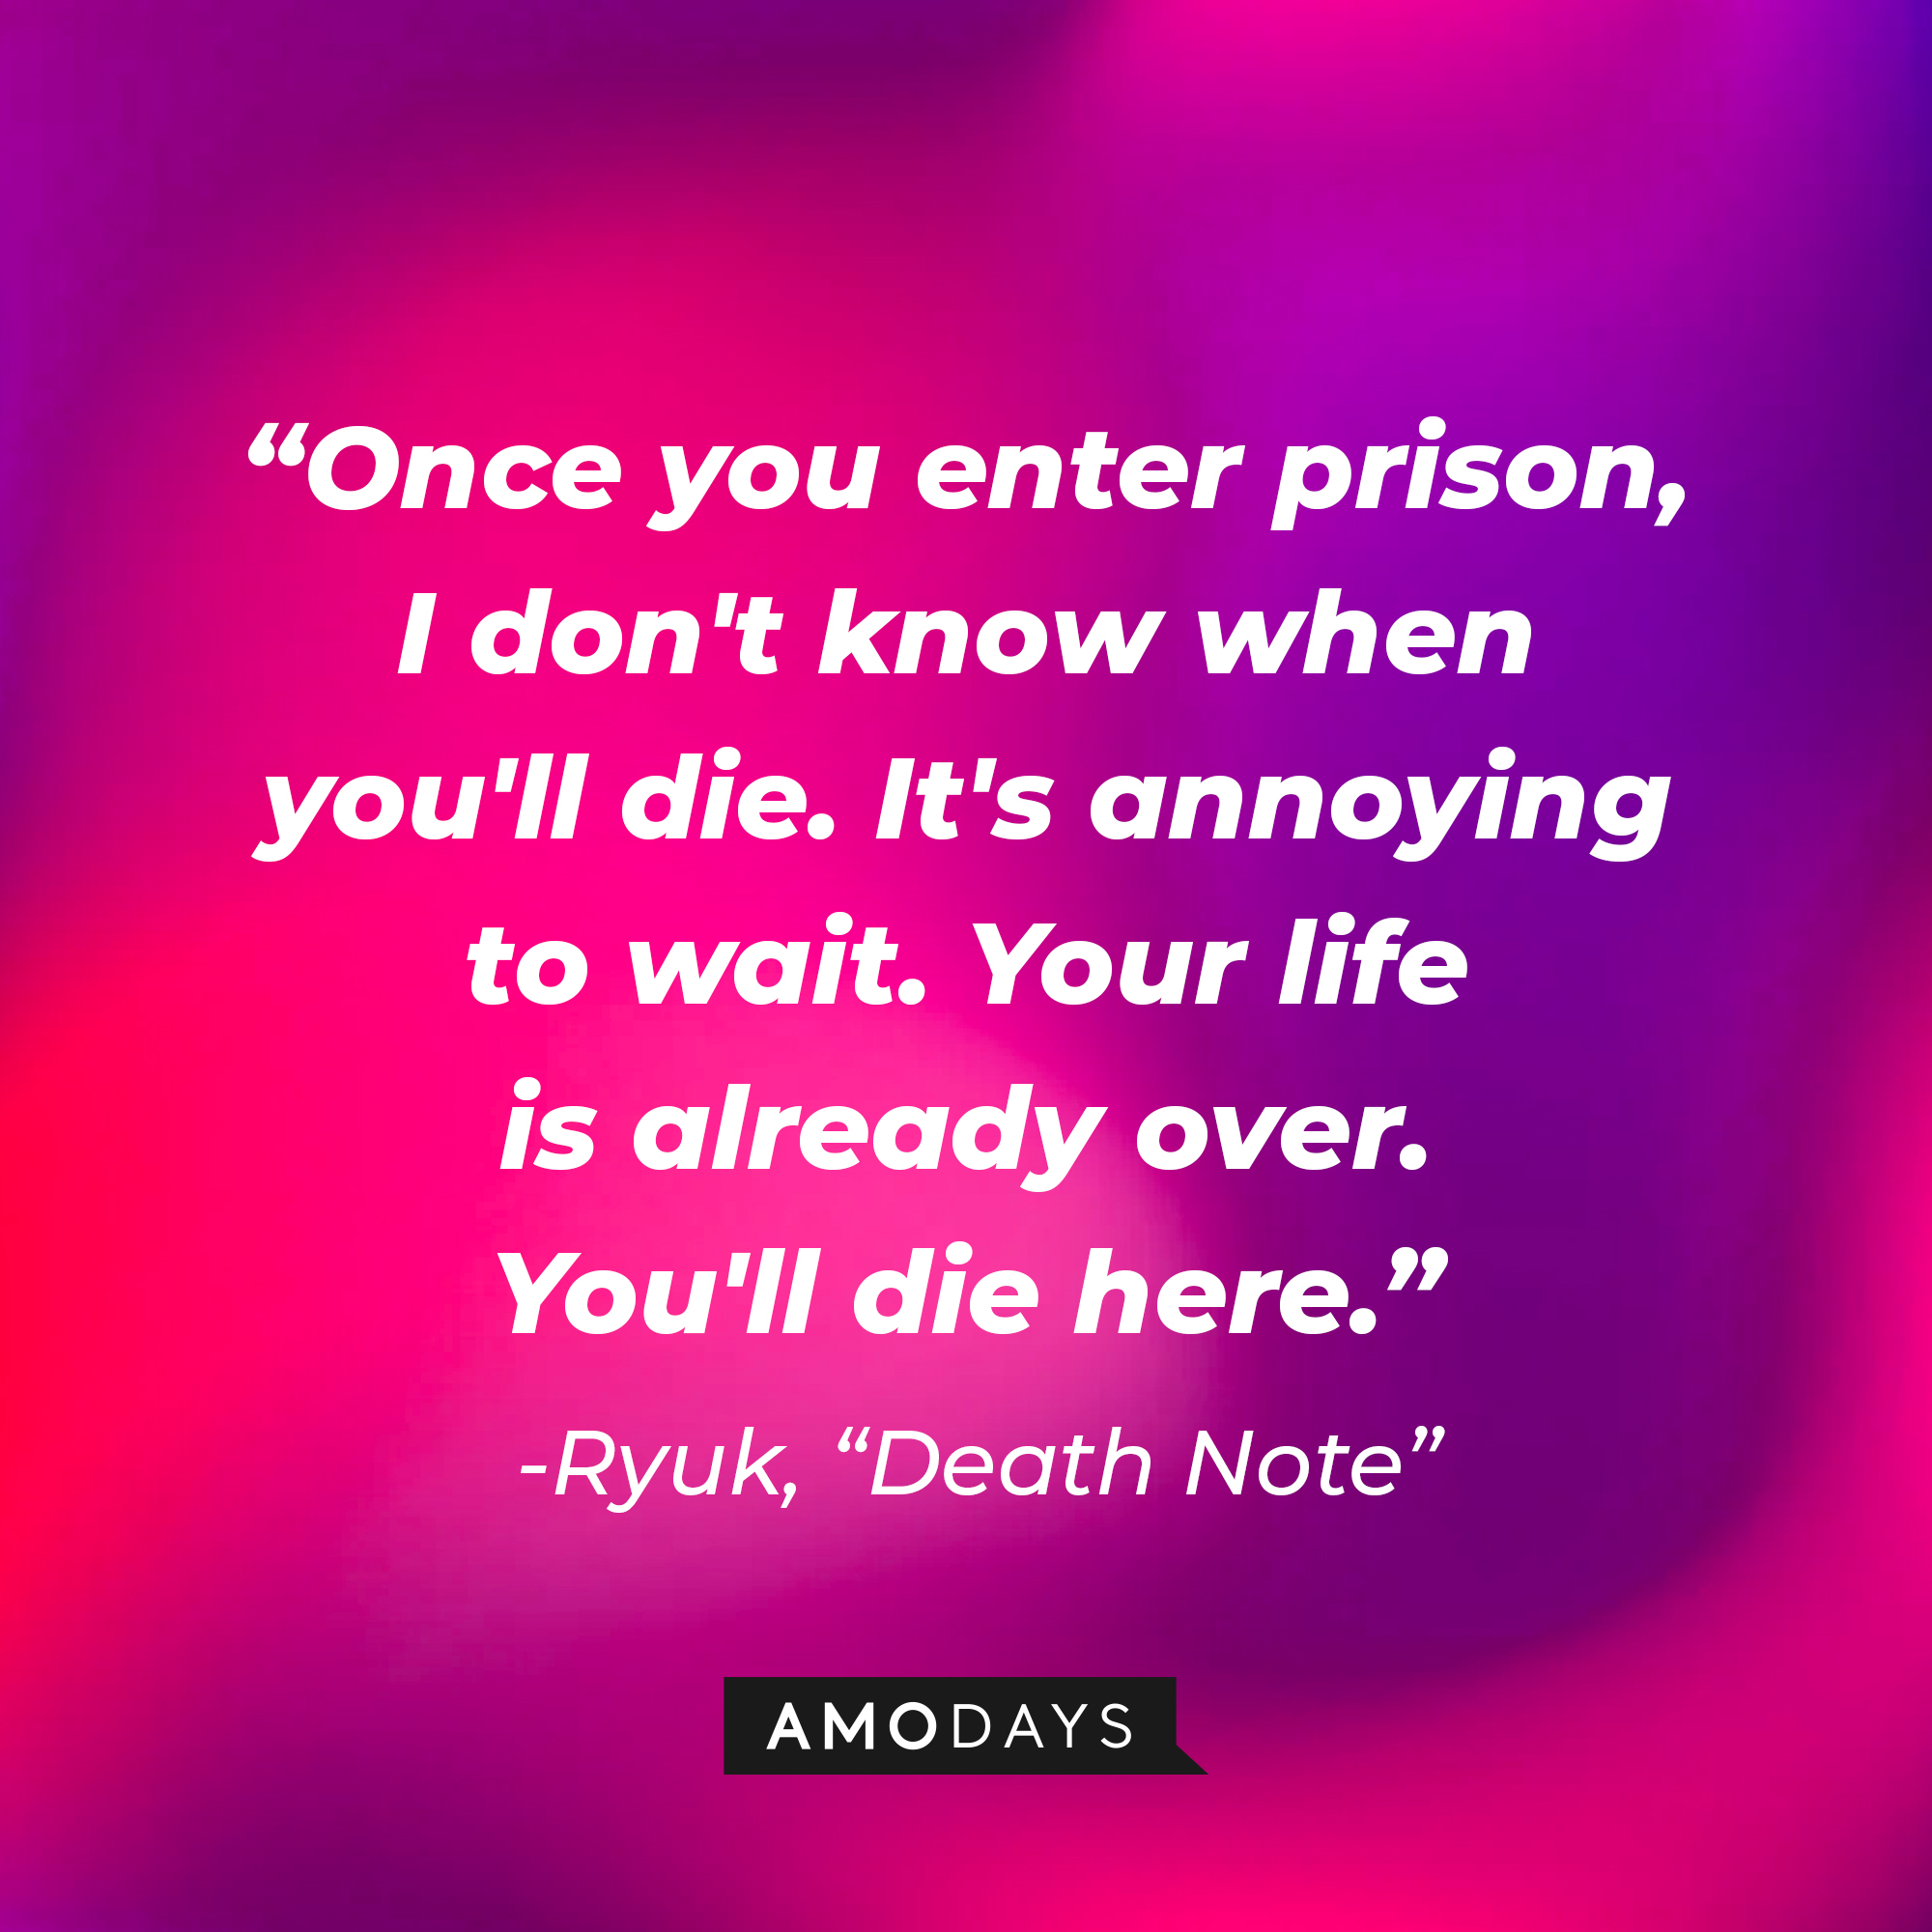 Ryuk's quote from "Death Note:" "Once you enter prison, I don't know when you'll die. It's annoying to wait. Your life is already over. You'll die here." | Source: AmoDays